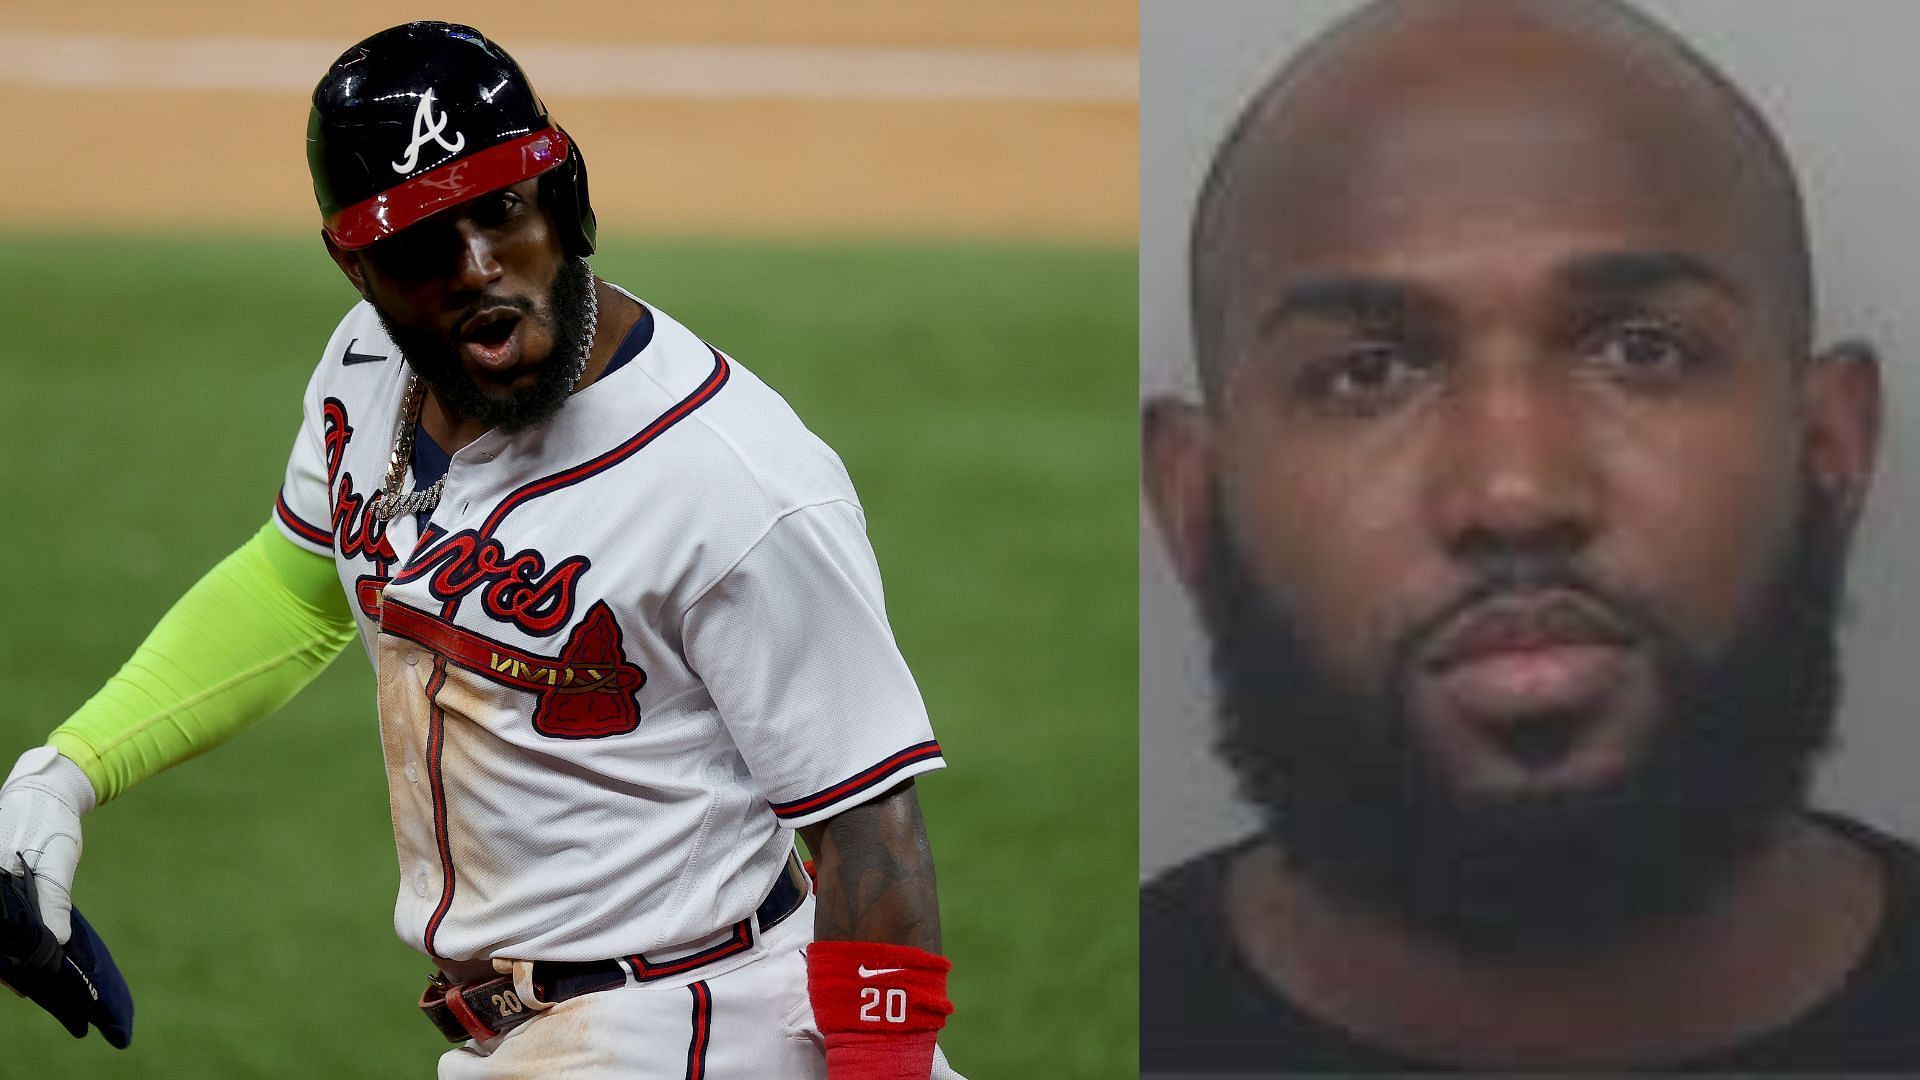 A Barstool Phill has called Marcell Ozuna